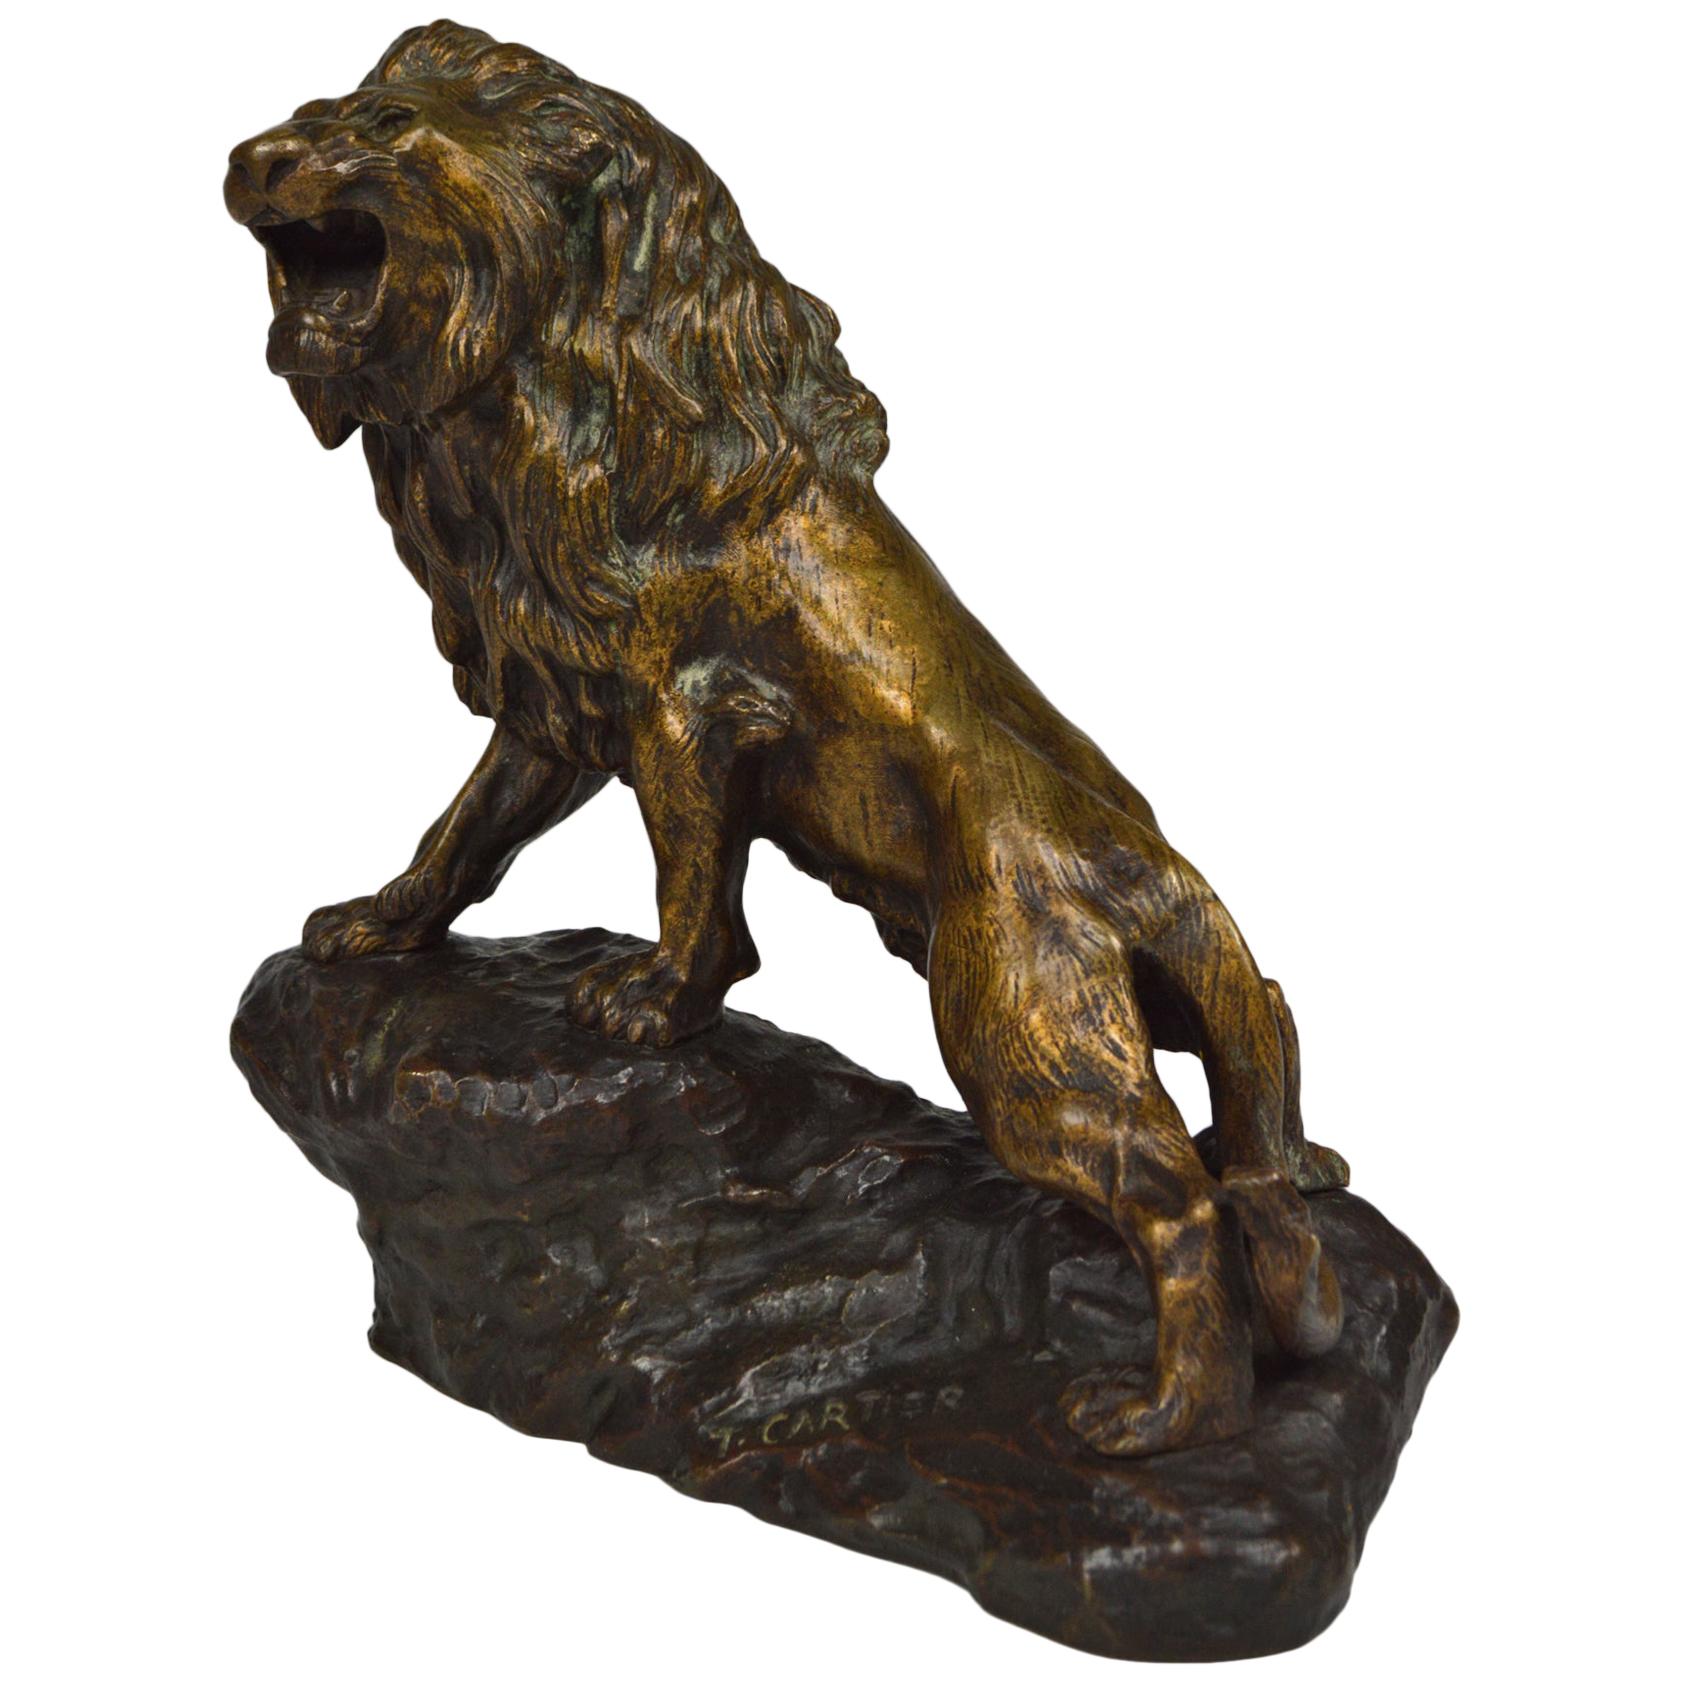 Snarling Lion in Bronze by Thomas François Cartier, France, Early 20th Century